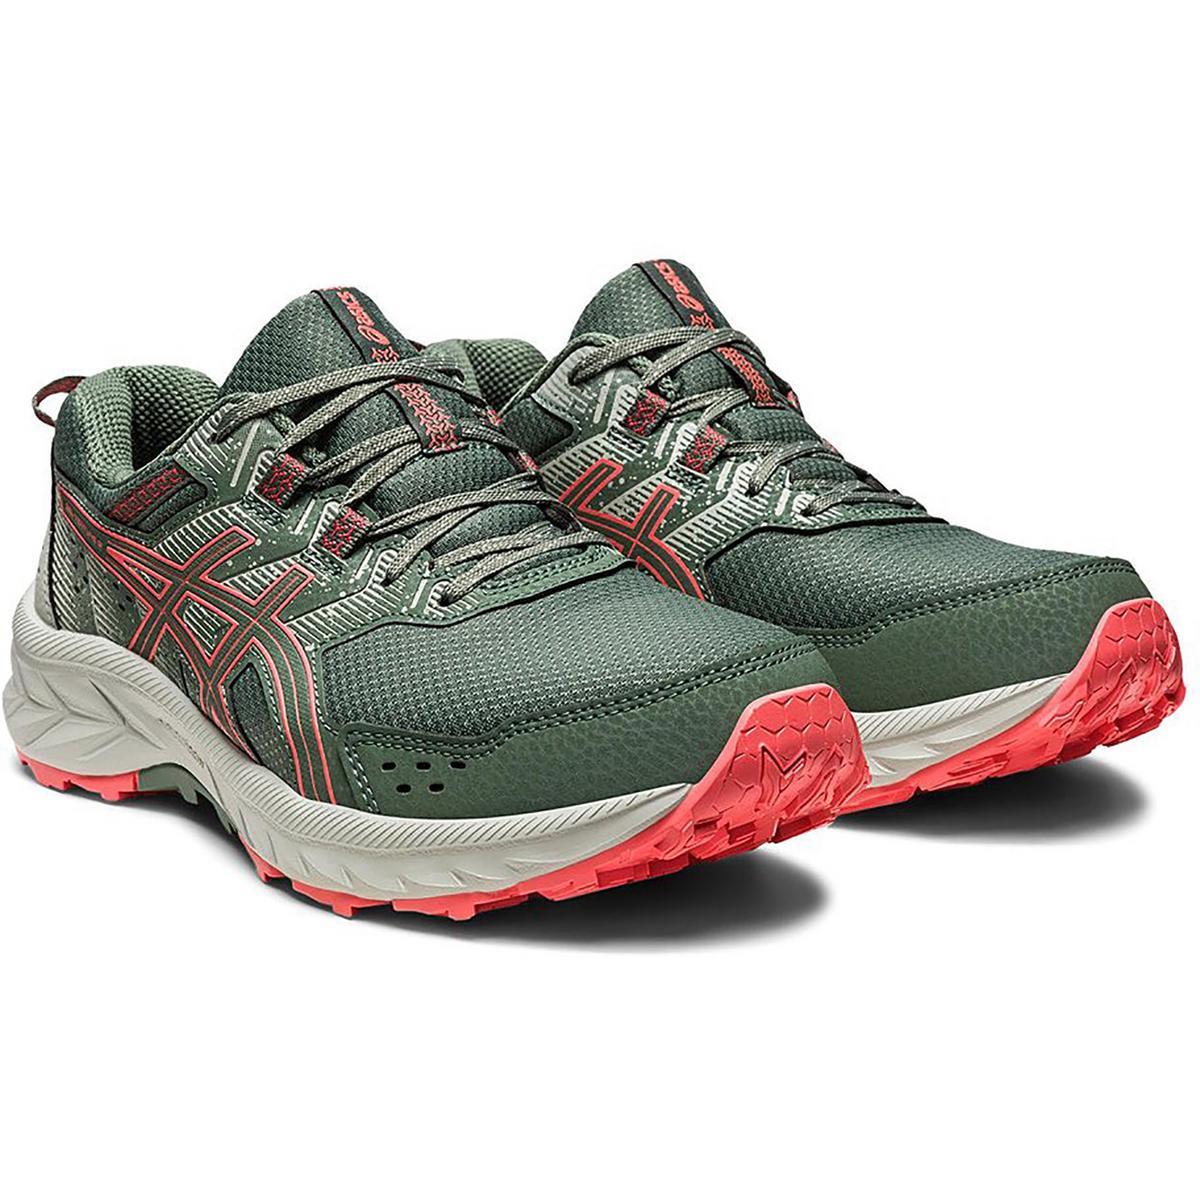 Asics Womens Gel-venture 9 Gym Athletic and Training Shoes Sneakers Bhfo 6559 Ivy/Papaya